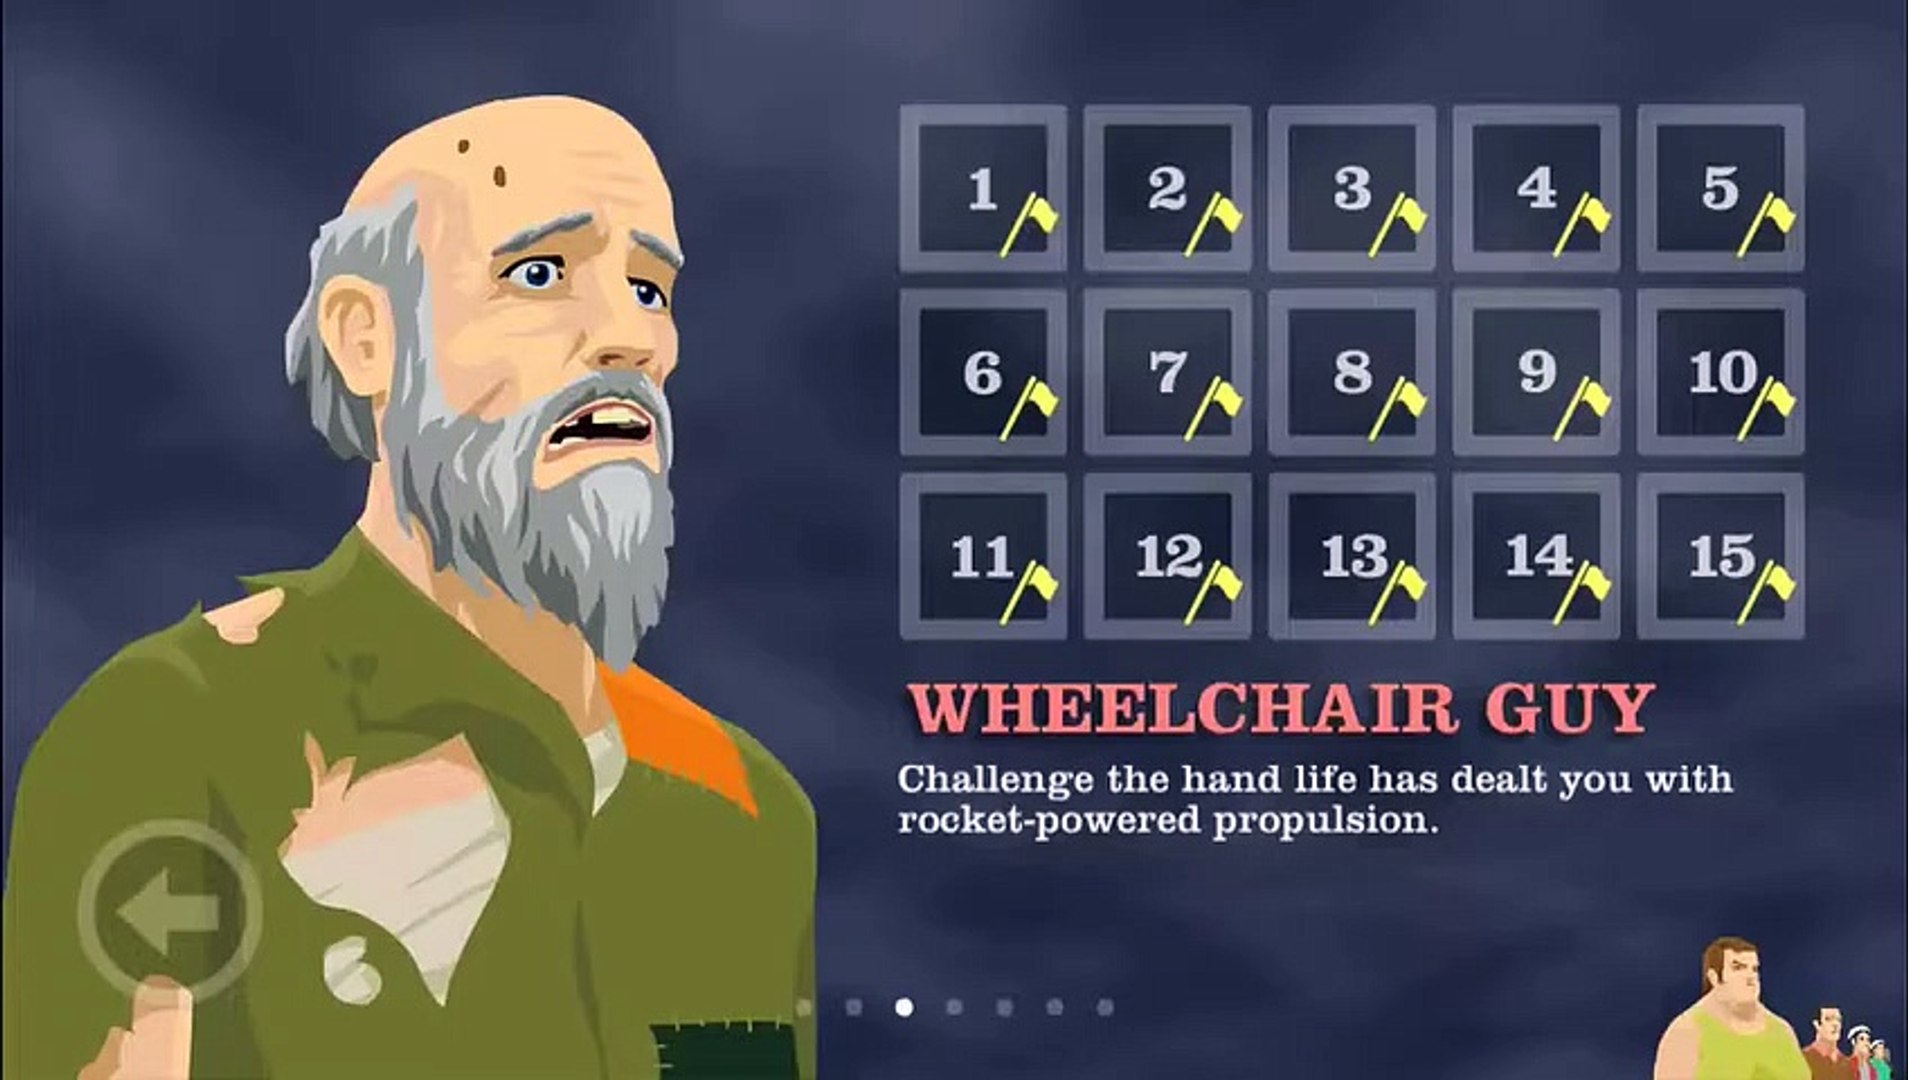 Play Happy Wheels 2 Game on